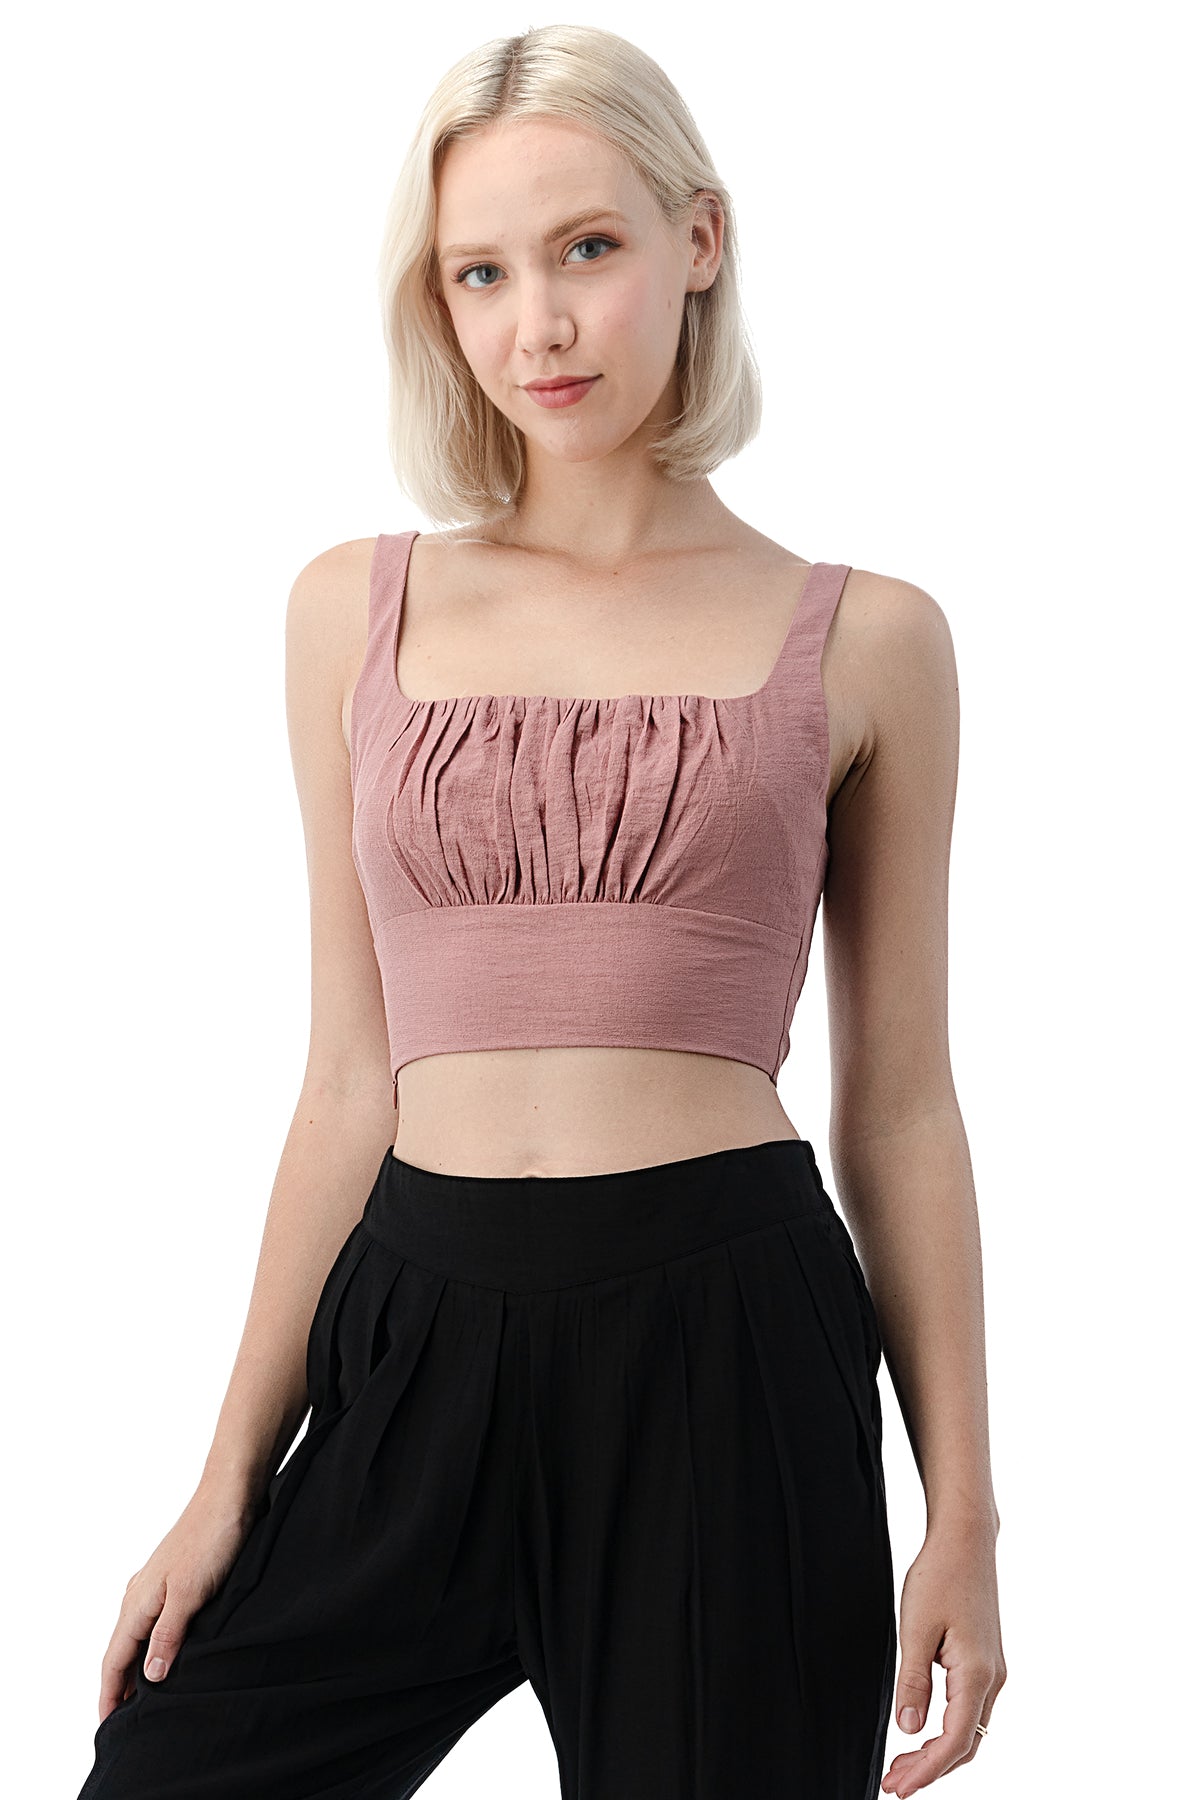 EDGY Land Girl's and Women's Pleated Front and Smocked Back Casual Tank Top